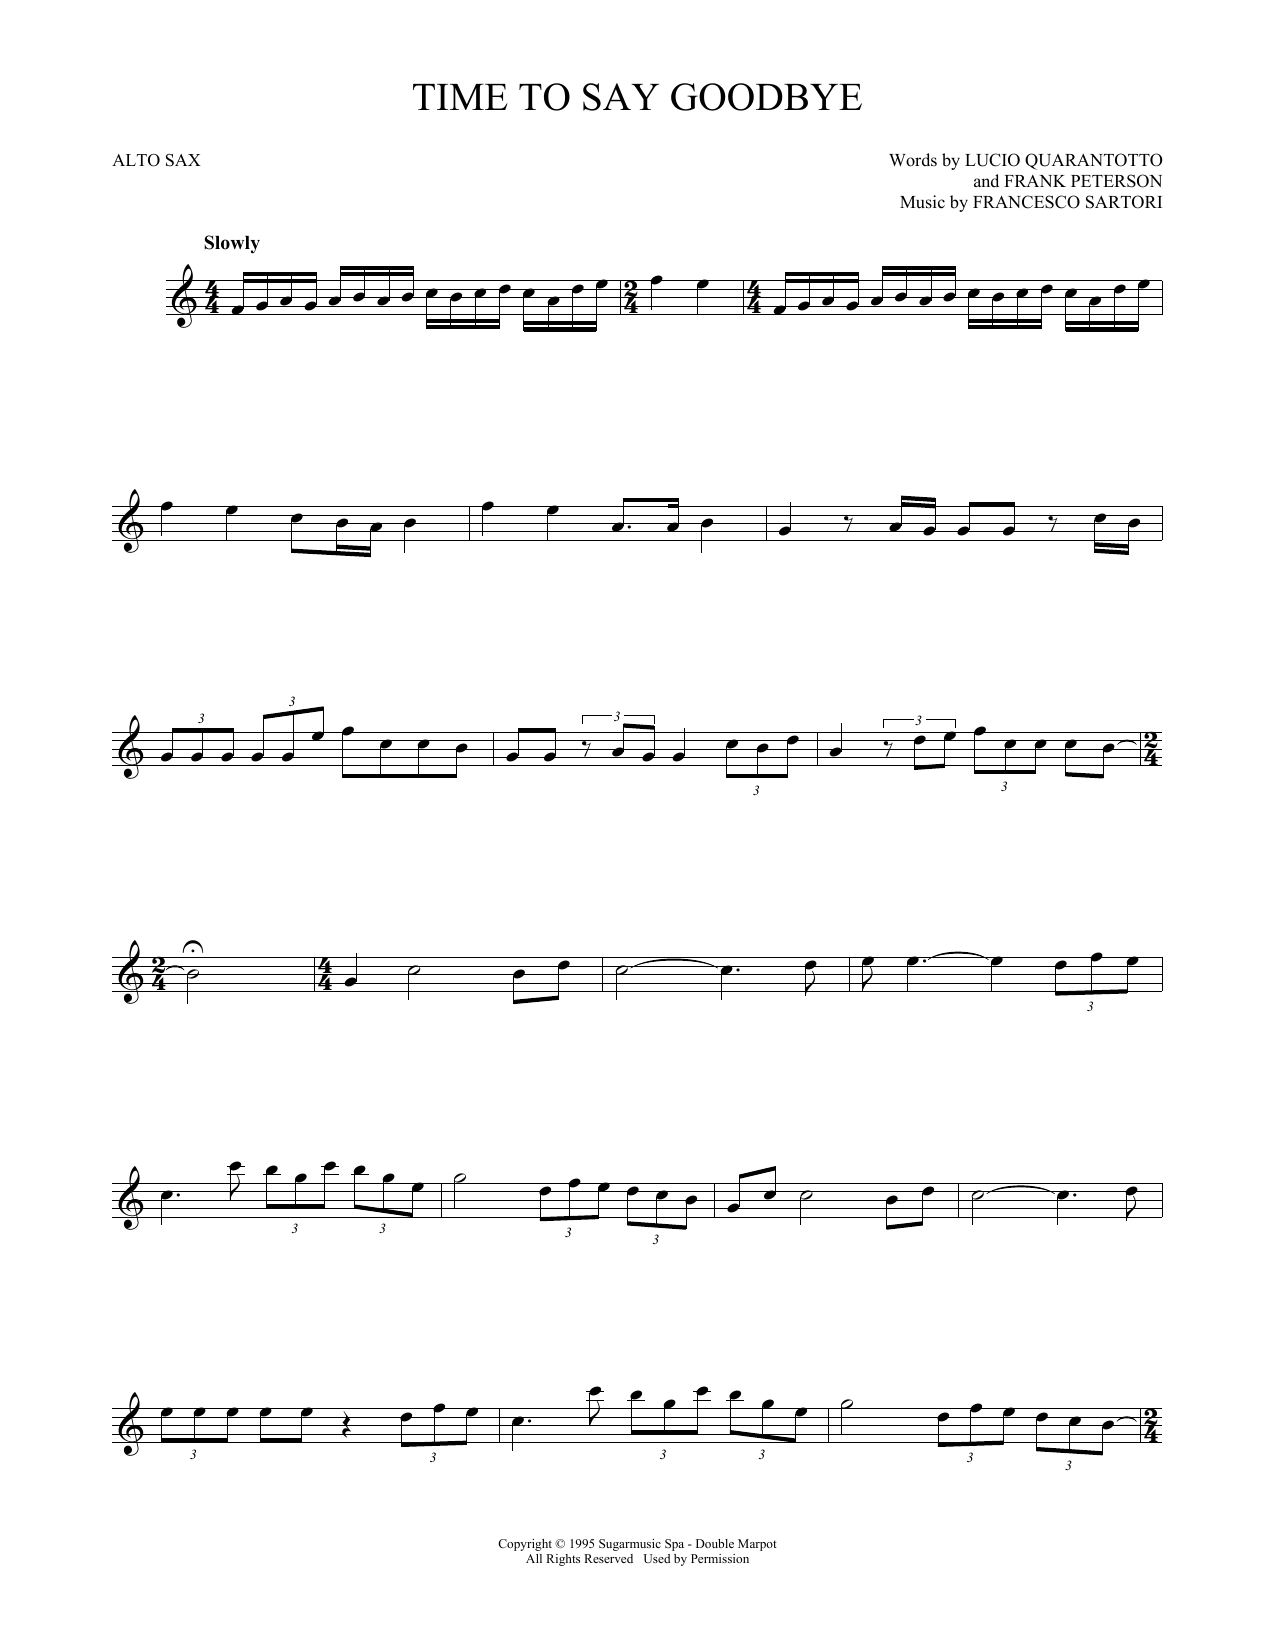 Download Andrea Bocelli & Sarah Brightman Time To Say Goodbye Sheet Music